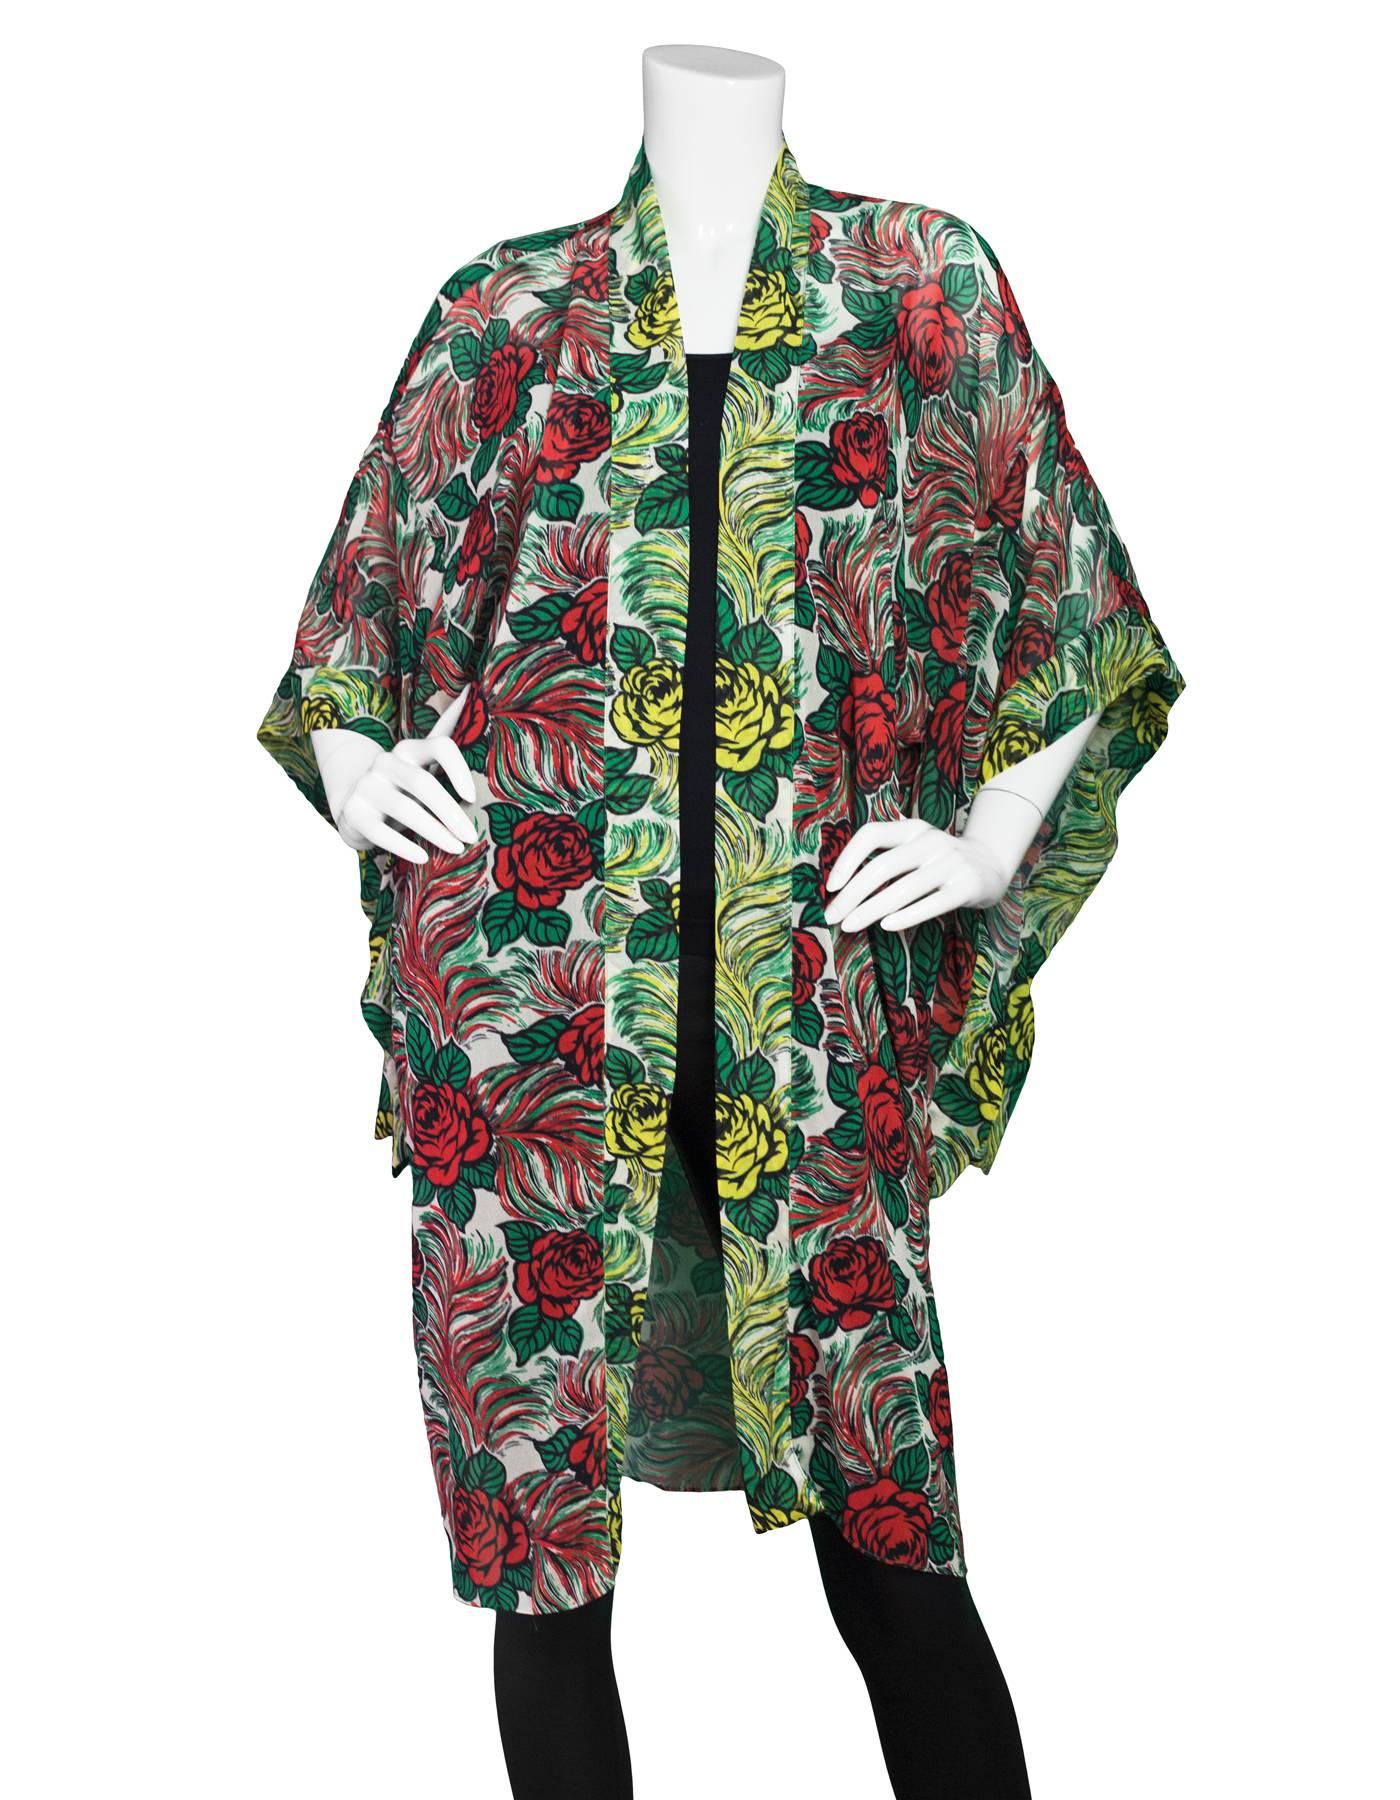 Anna Sui Floral Print Silk Kimono
Features slits on undersides of sleeves 

Color: Black, red, green and white
Composition: Not given- believed to 100% silk
Lining: None
Closure/Opening: Open front
Exterior Pockets: None
Interior Pockets: